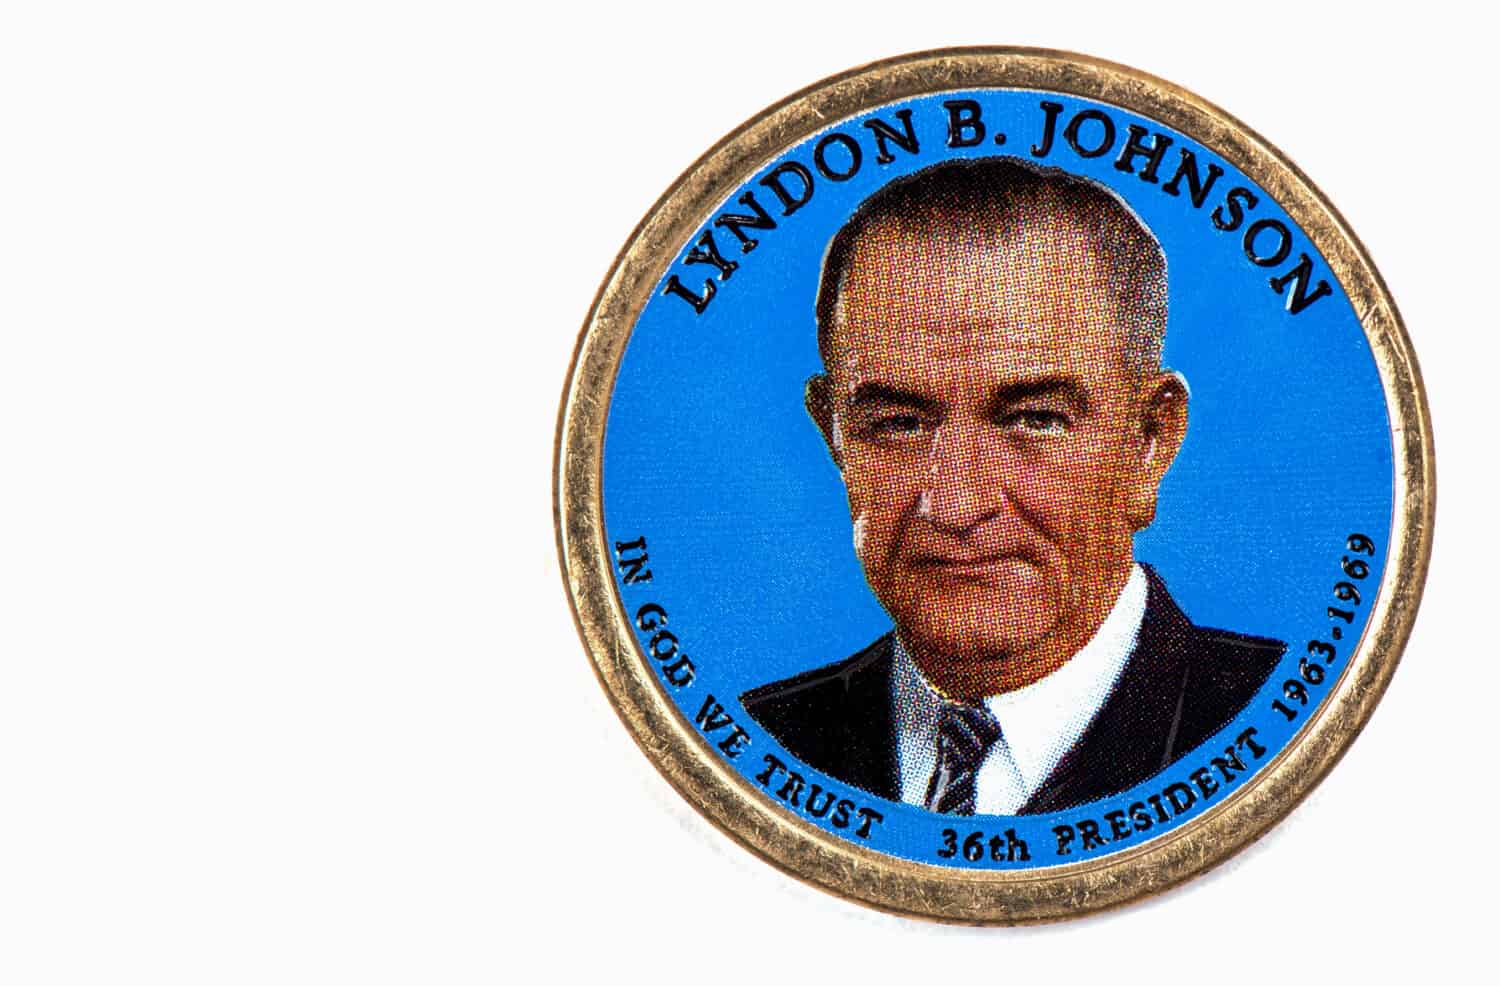 Lyndon B. Johnson Presidential Dollar, USA coin a portrait image of LYNDON B. JOHNSON in God We Trust 36th PRESIDENT 1963-1969 on $1 United Staten of Amekica, Close Up UNC Uncirculated - Collection